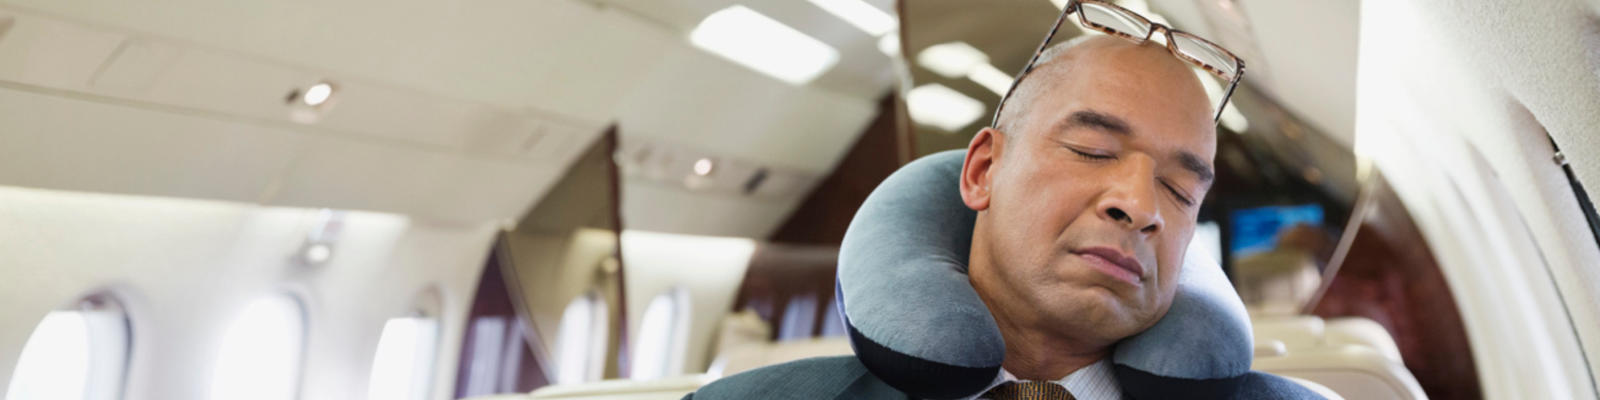 A man sleeping on a plane with a neck pillow around his neck